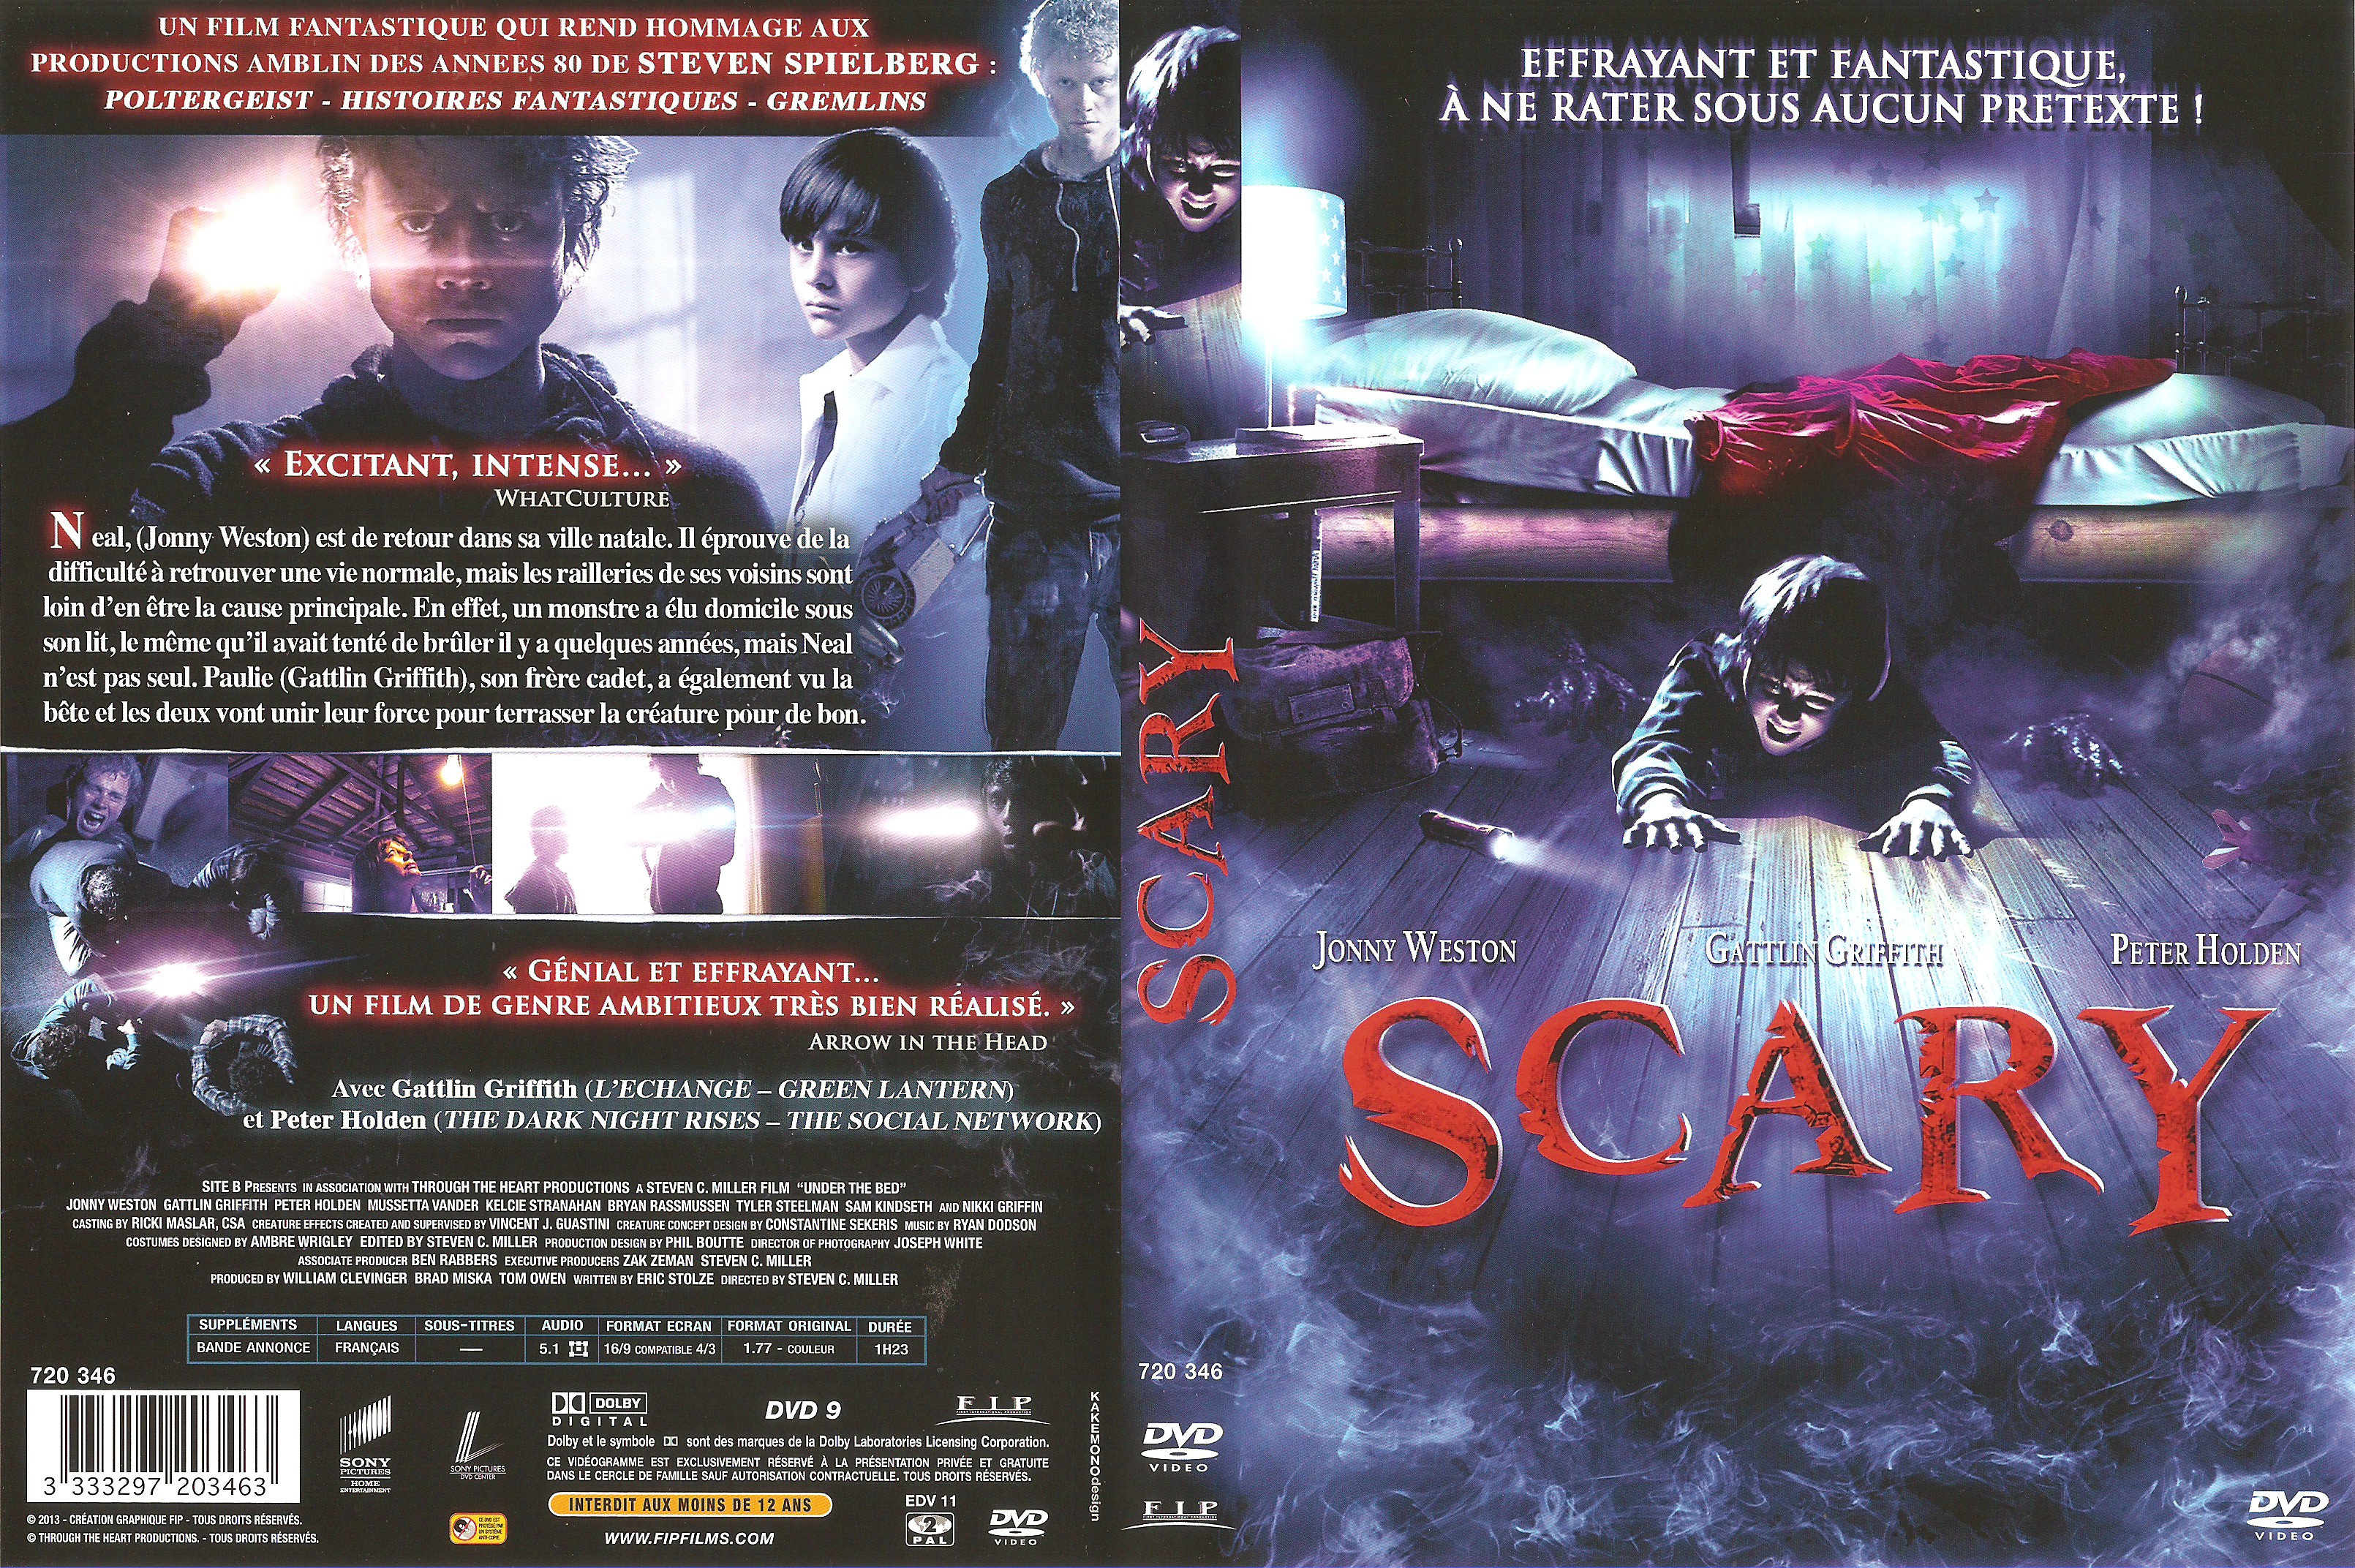 Jaquette DVD Scary